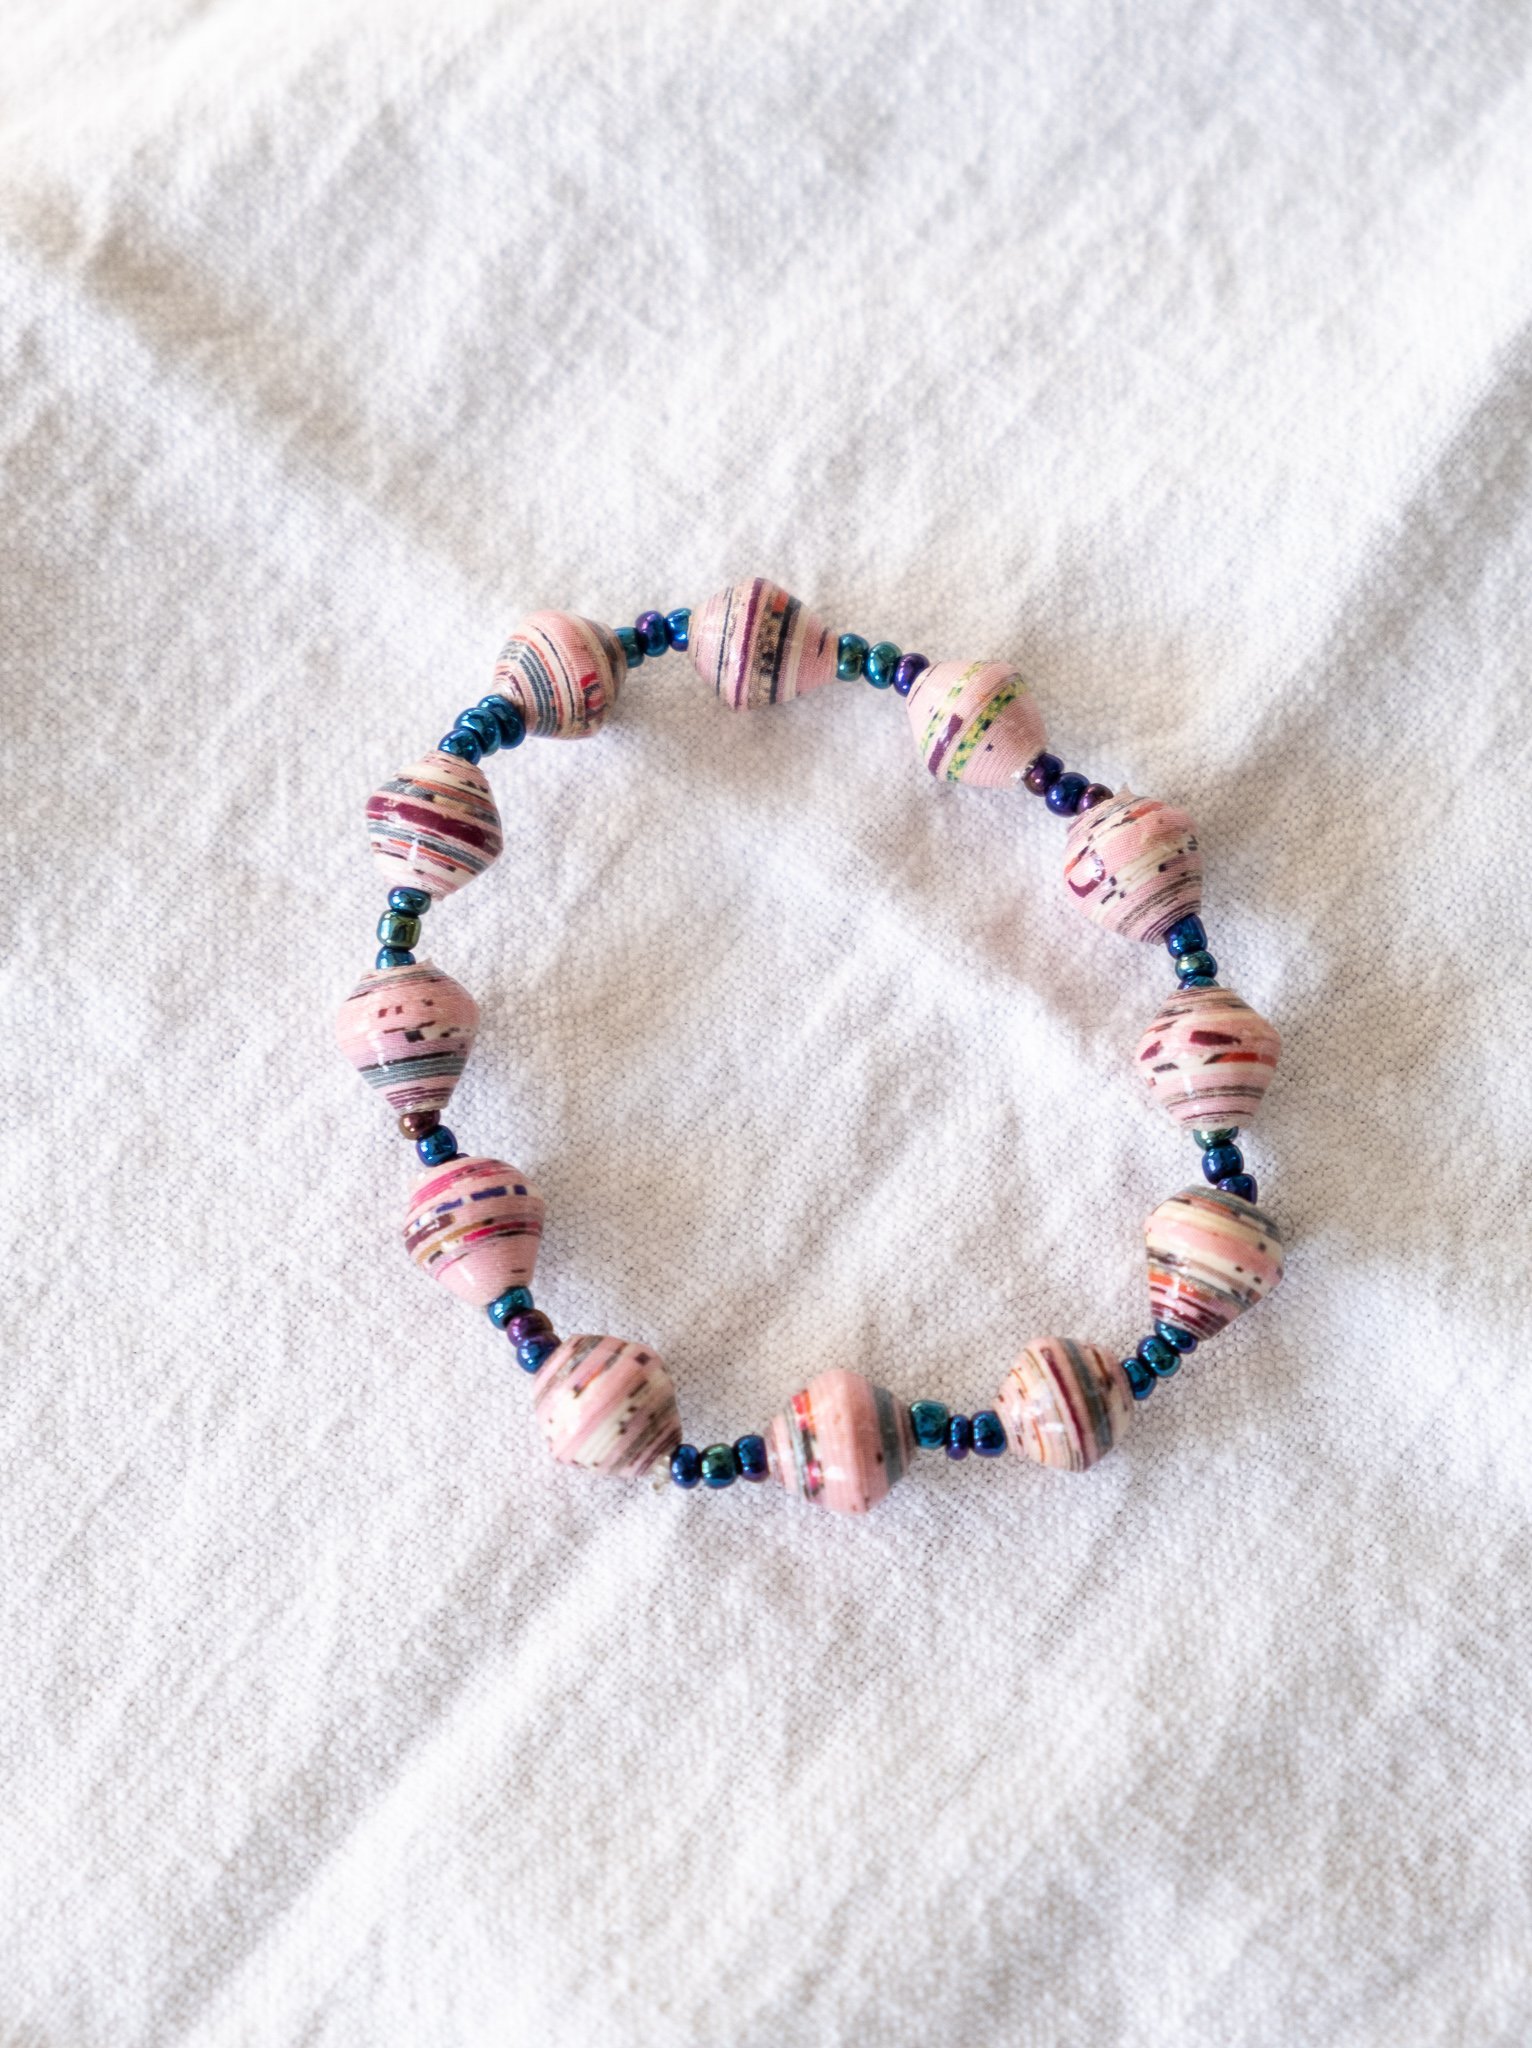 How to Make Bracelets With Beads Made Out of Paper